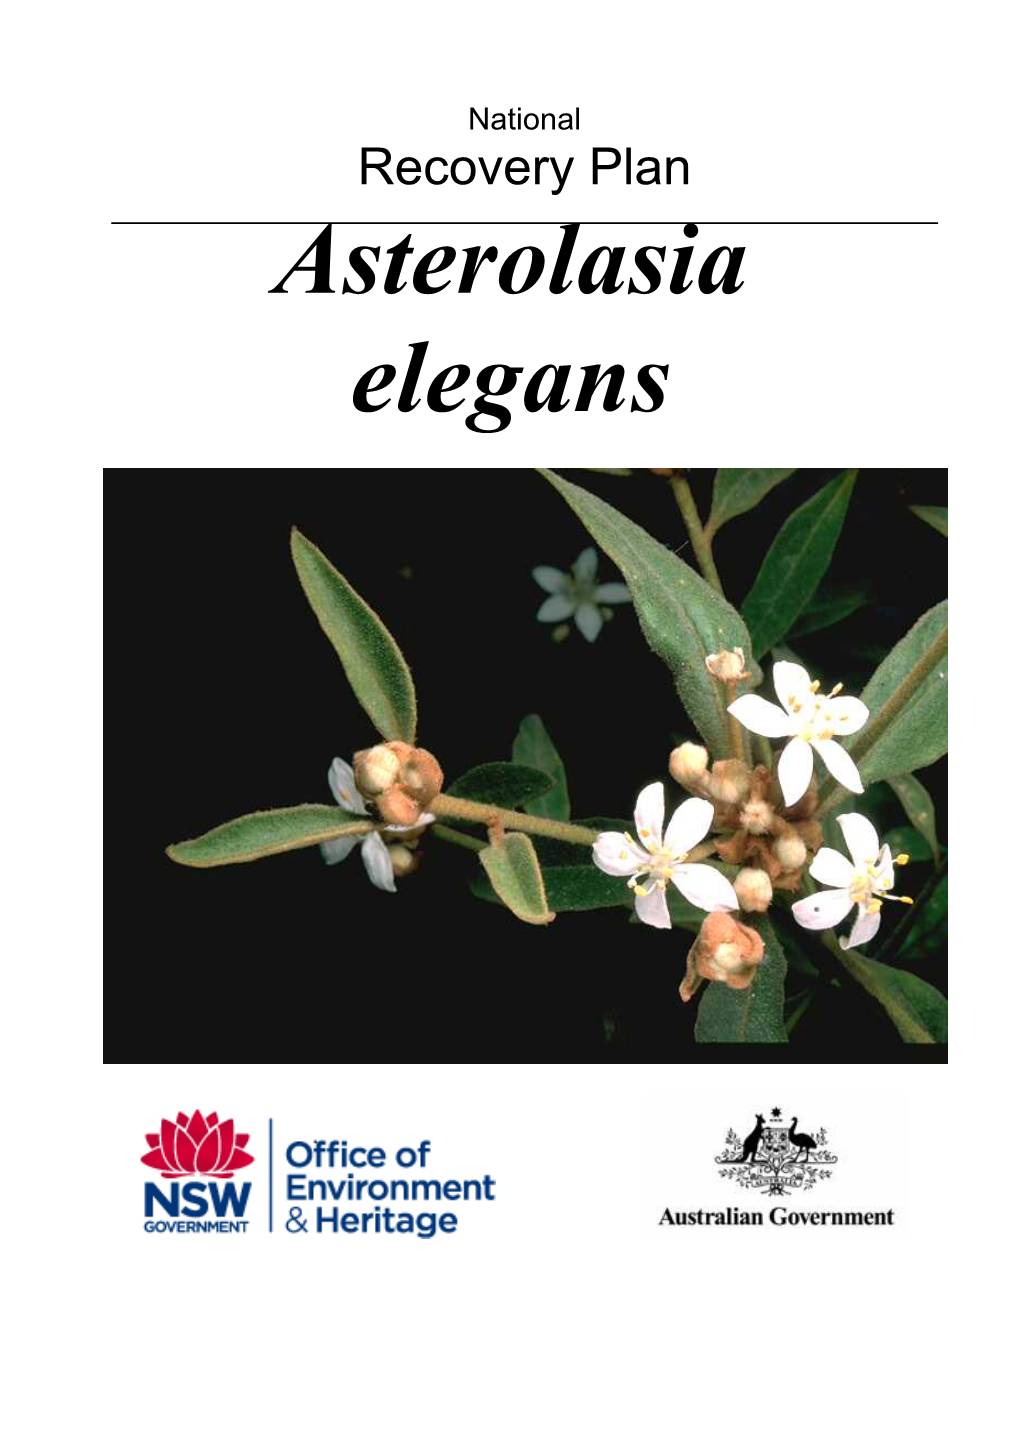 Recovery Plan for Asterolasia Elegans, Office of Environment and Heritage (NSW), Sydney